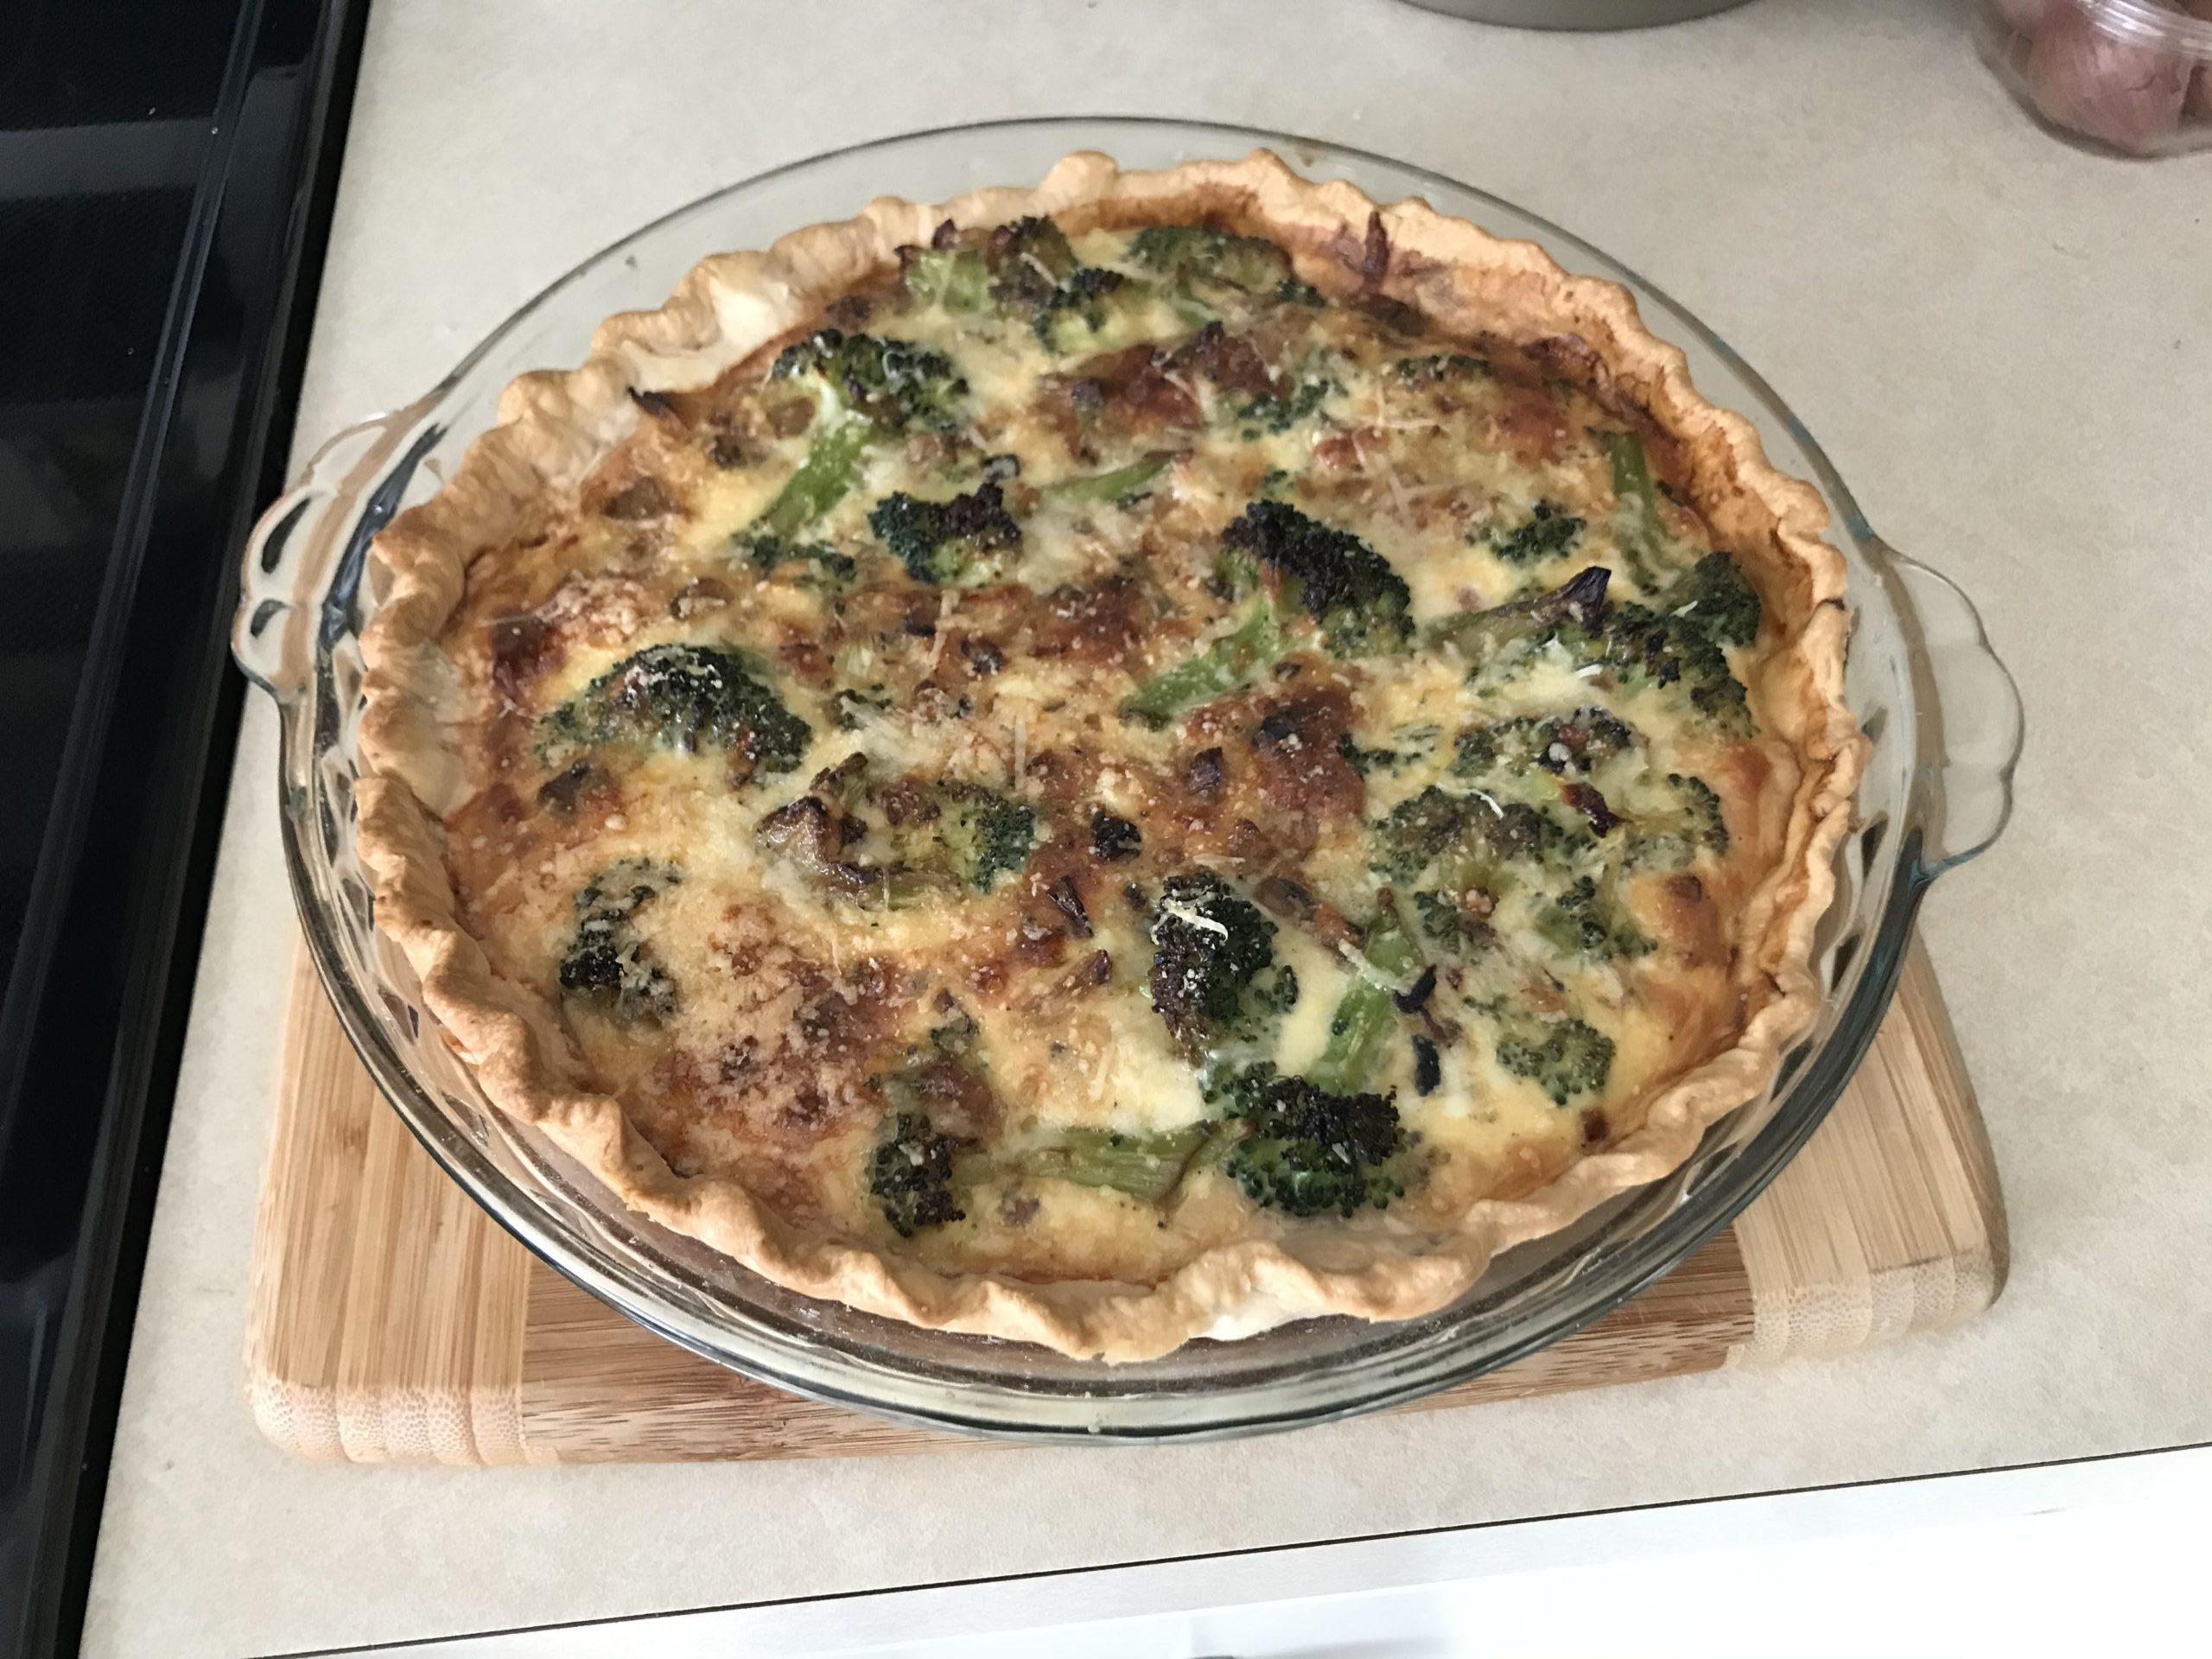 Back to Baking-Broccoli Quiche for Dinner